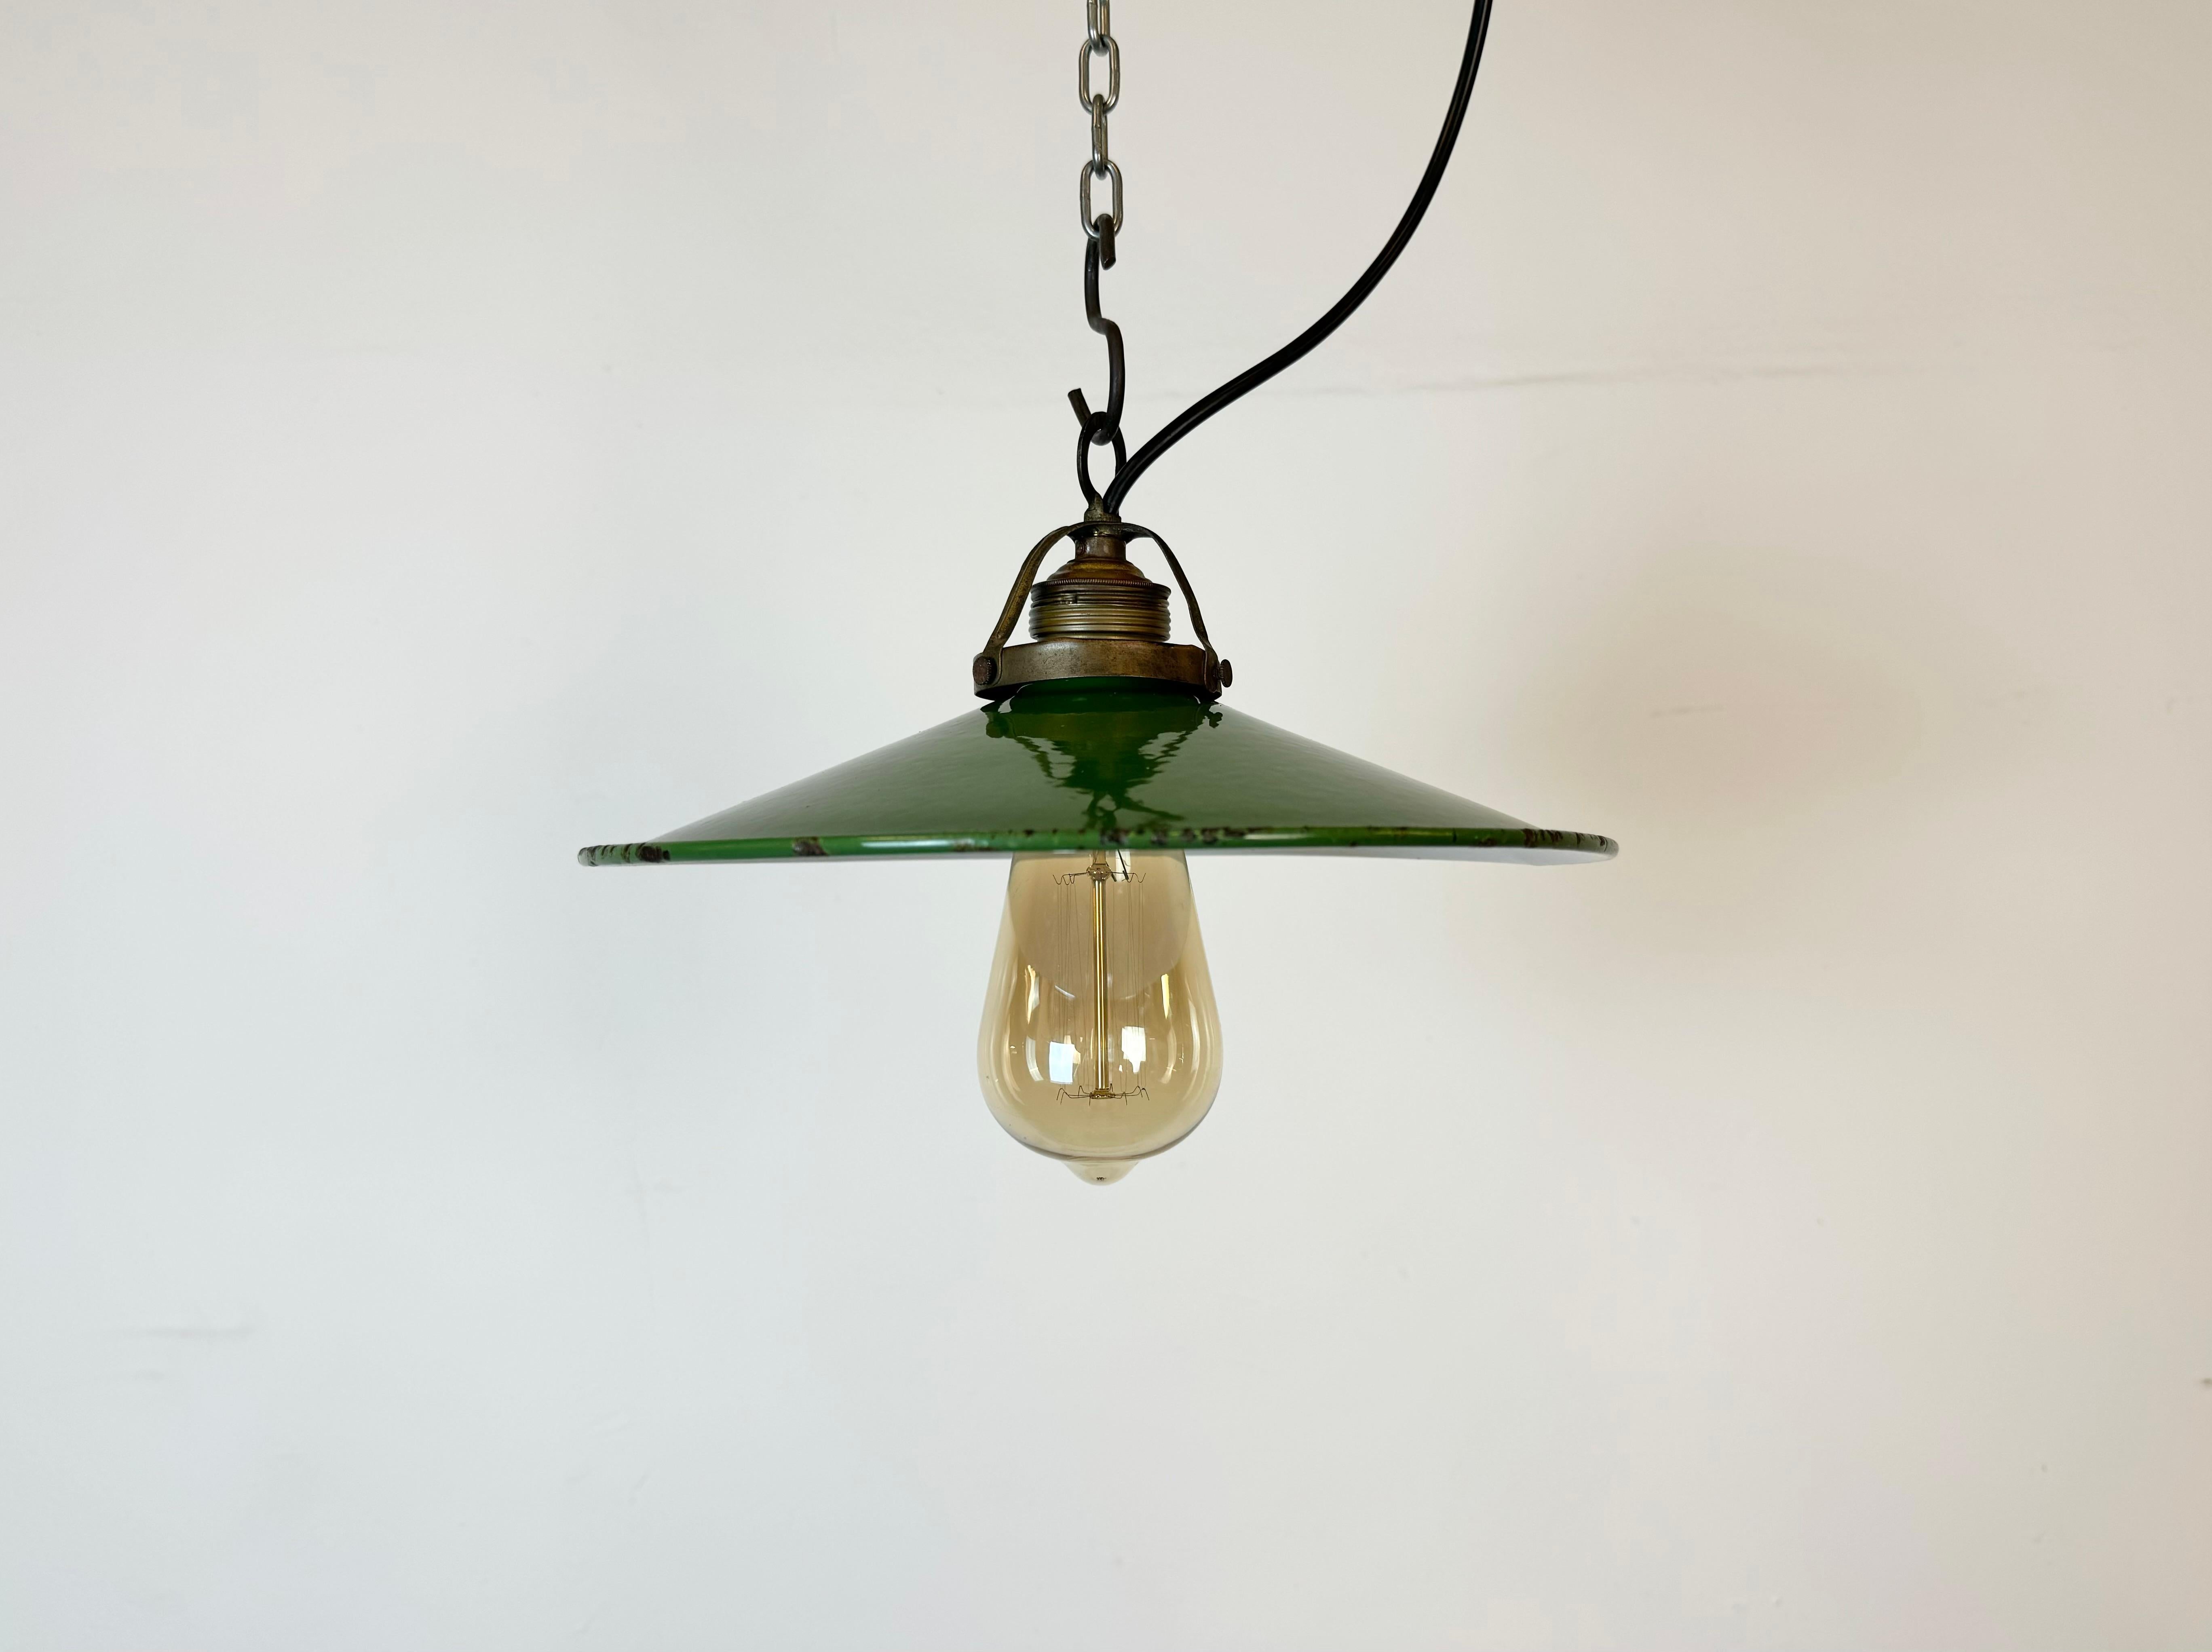 Vintage industrial enamel pendant lamp from the 1930s. It features a green enamel shade with white enamel interior and a brass top. Original porcelain socket requires standard E 27/ E 26 light bulbs. New wire. The weight of the lamp is 0,4 kg. The